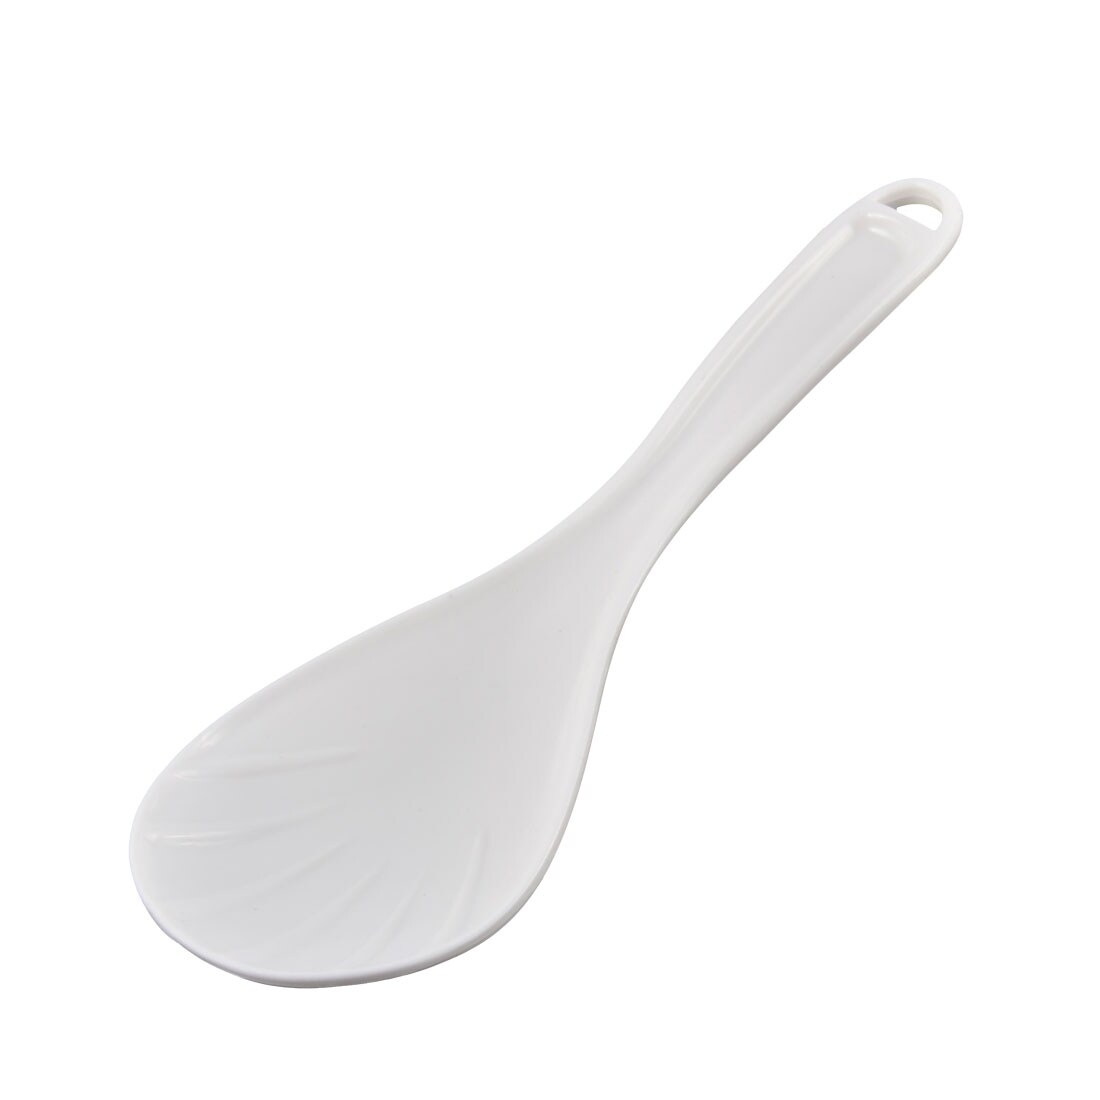 https://ak1.ostkcdn.com/images/products/is/images/direct/c59ca7274ccc394d097691a7f9c65a33c561885a/Plastic-Curved-Grip-Paddle-Dinner-Rice-Meal-Spoon-Kitchenware-Tool.jpg